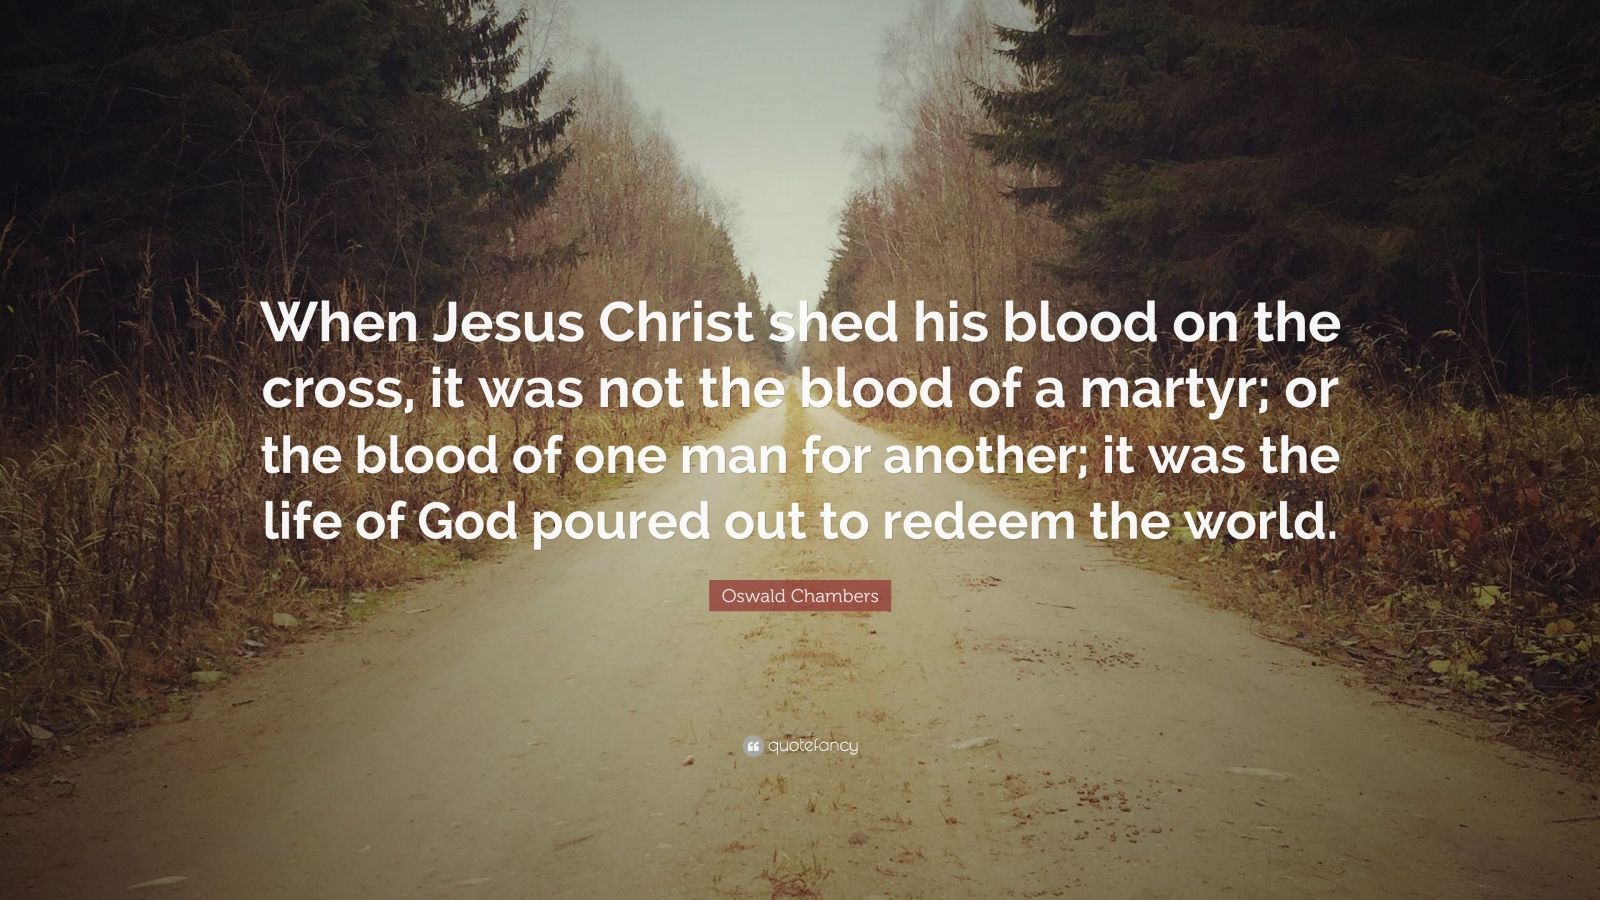 Oswald Chambers Quote: “When Jesus Christ shed his blood on the cross